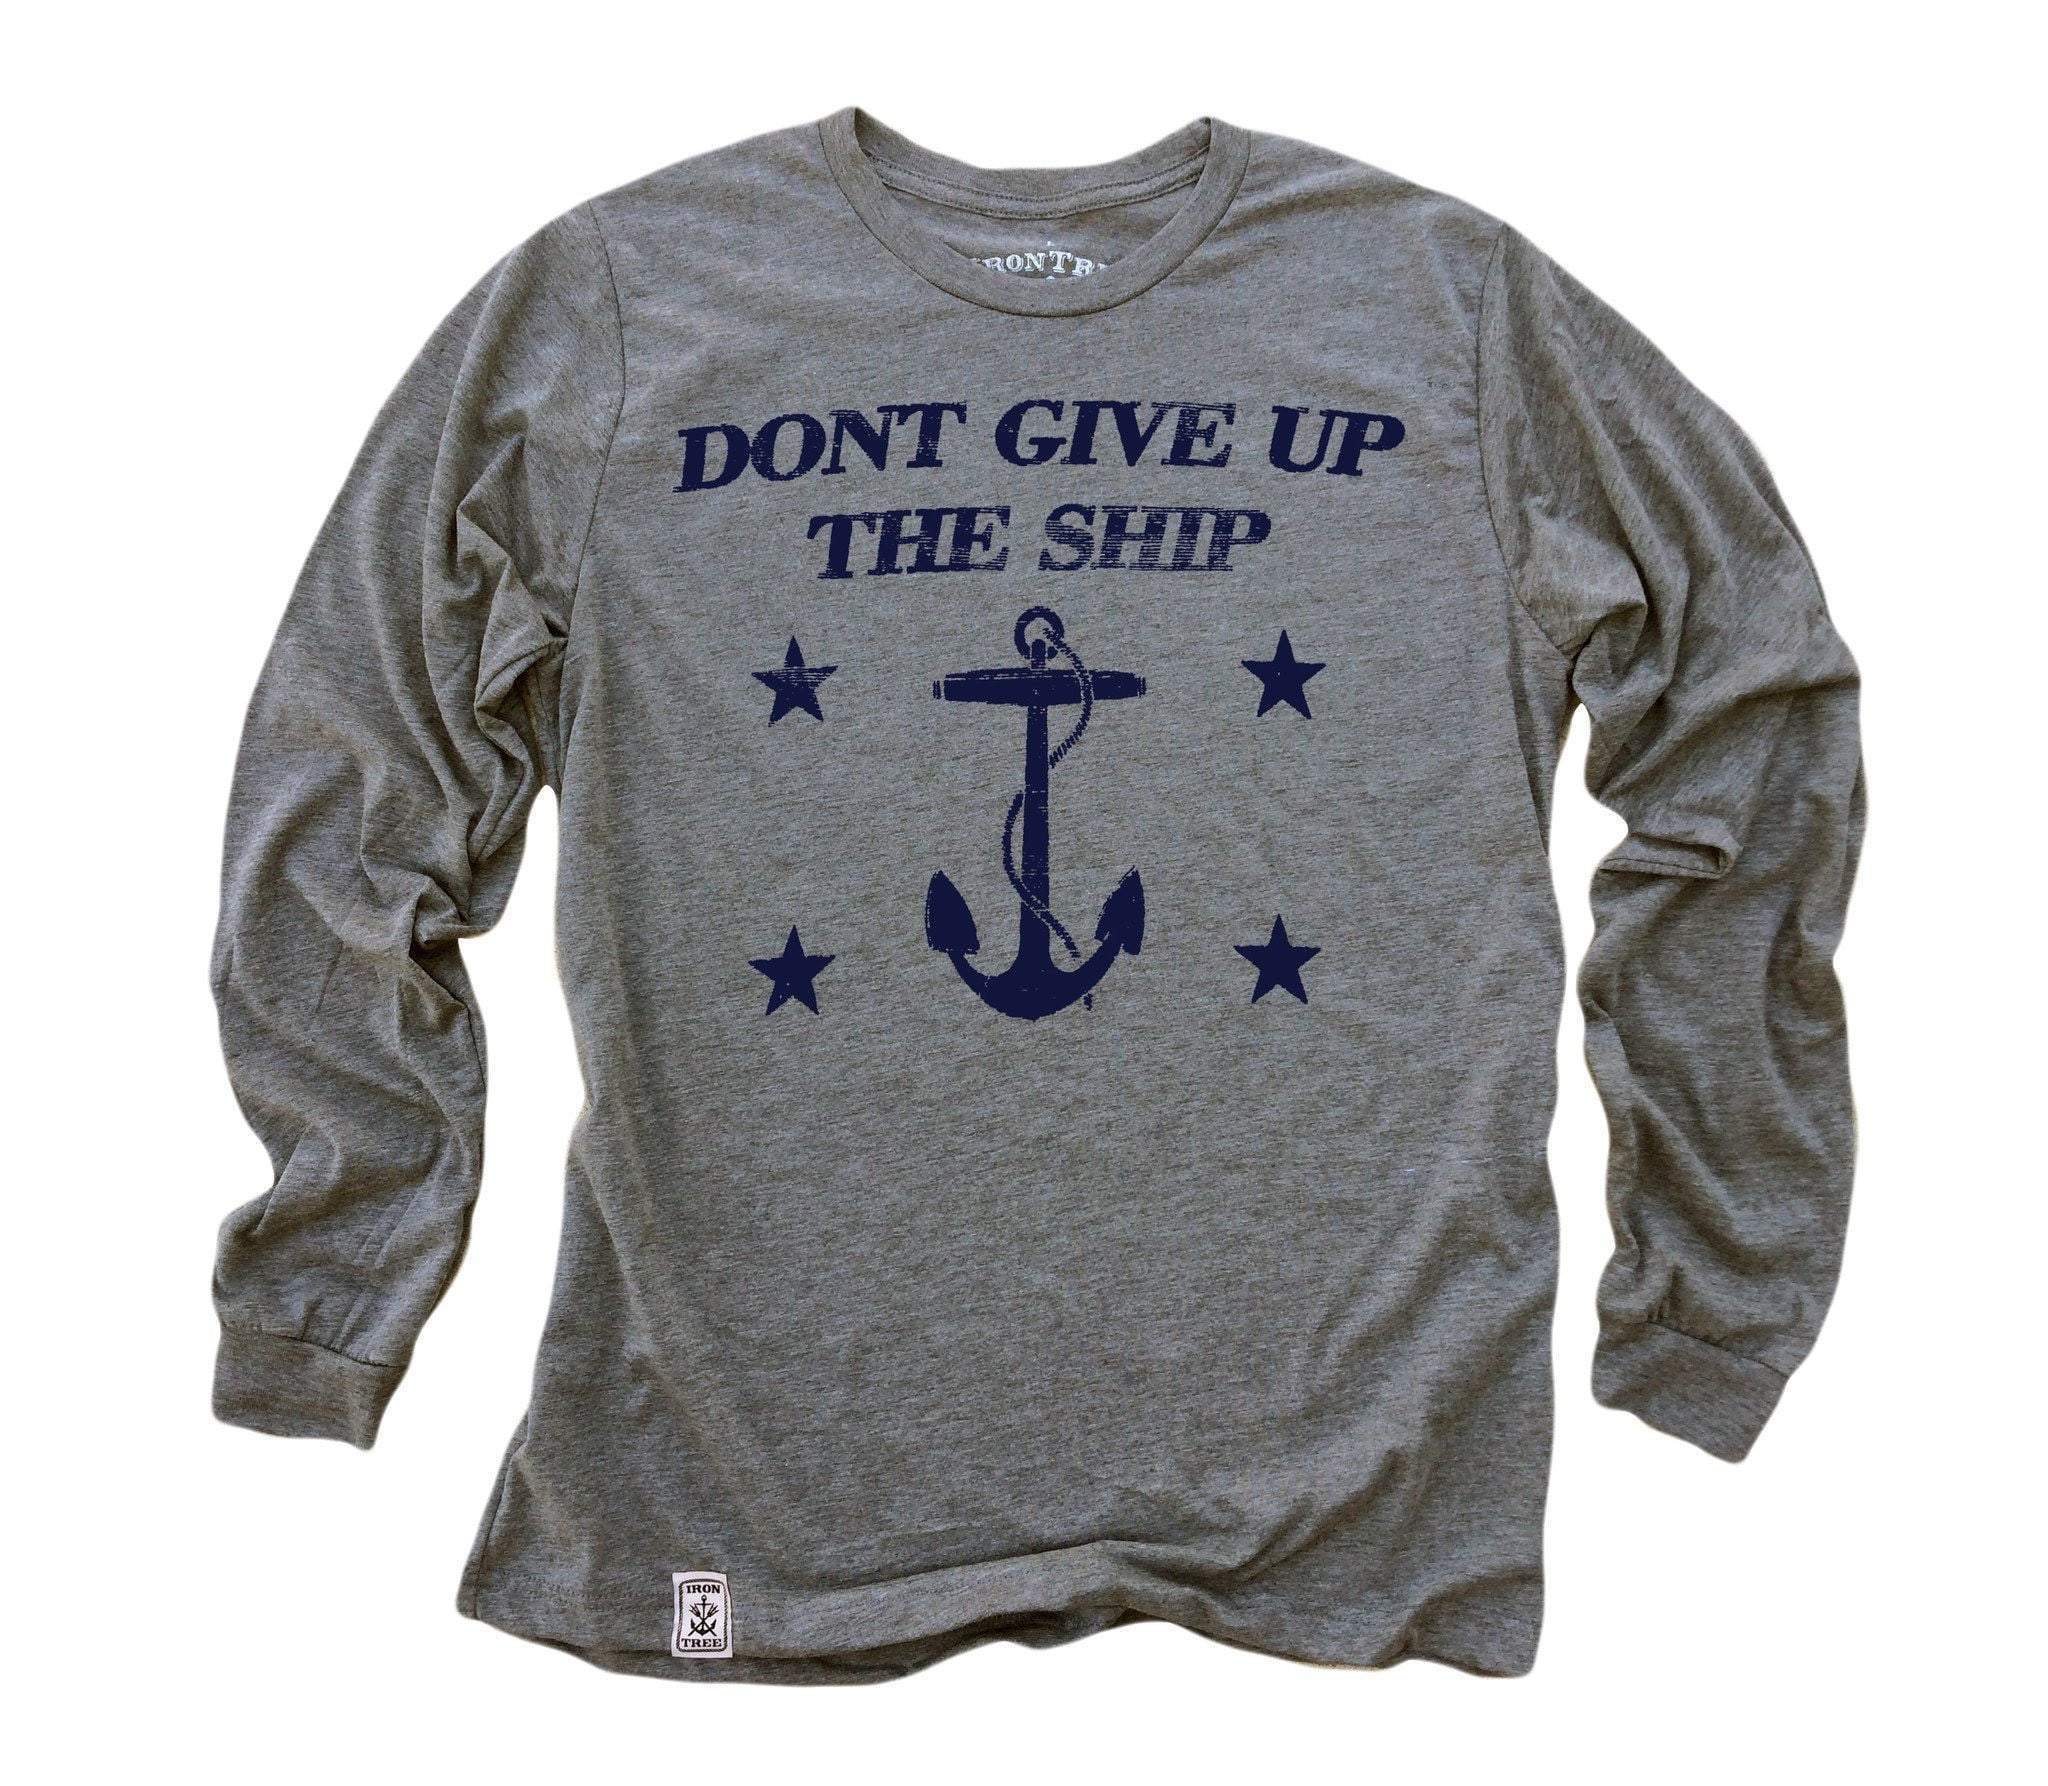 Dont Give Up the Ship: Tri-Blend Long Sleeve T-Shirt in Heather Grey